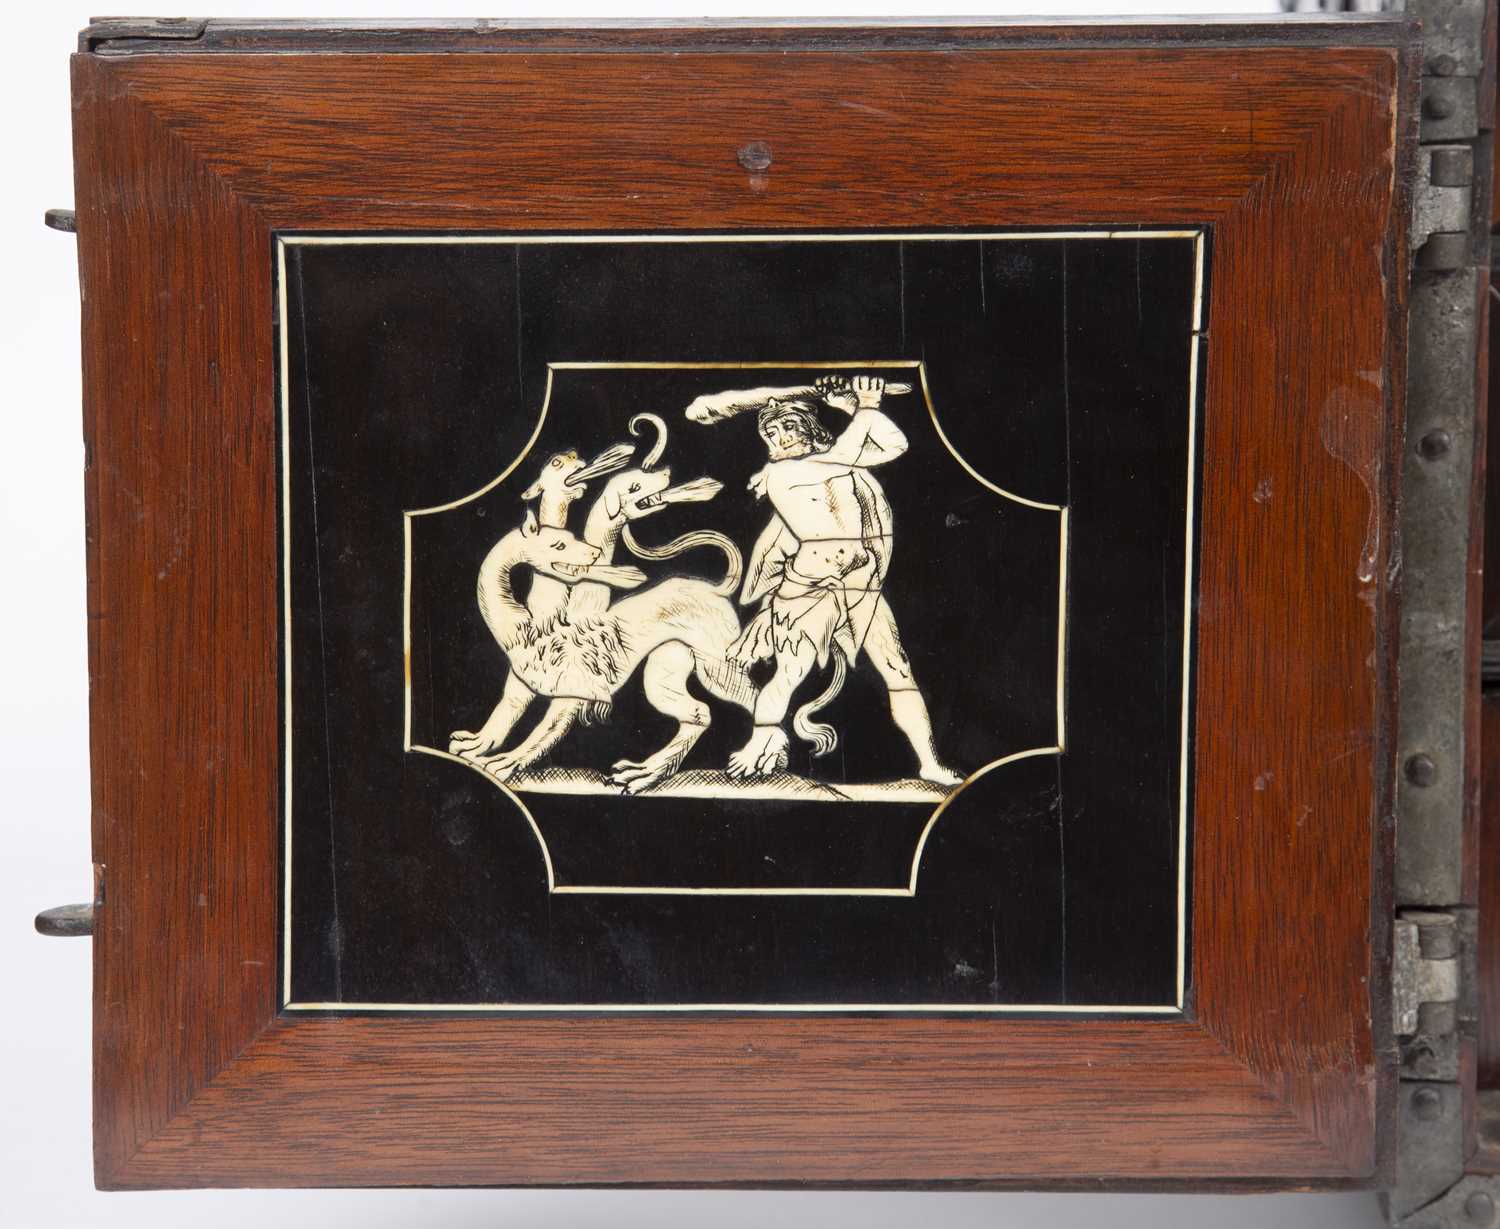 A 17th century German oak and metal bound table top cabinet of drawers, having a double headed eagle - Image 9 of 10